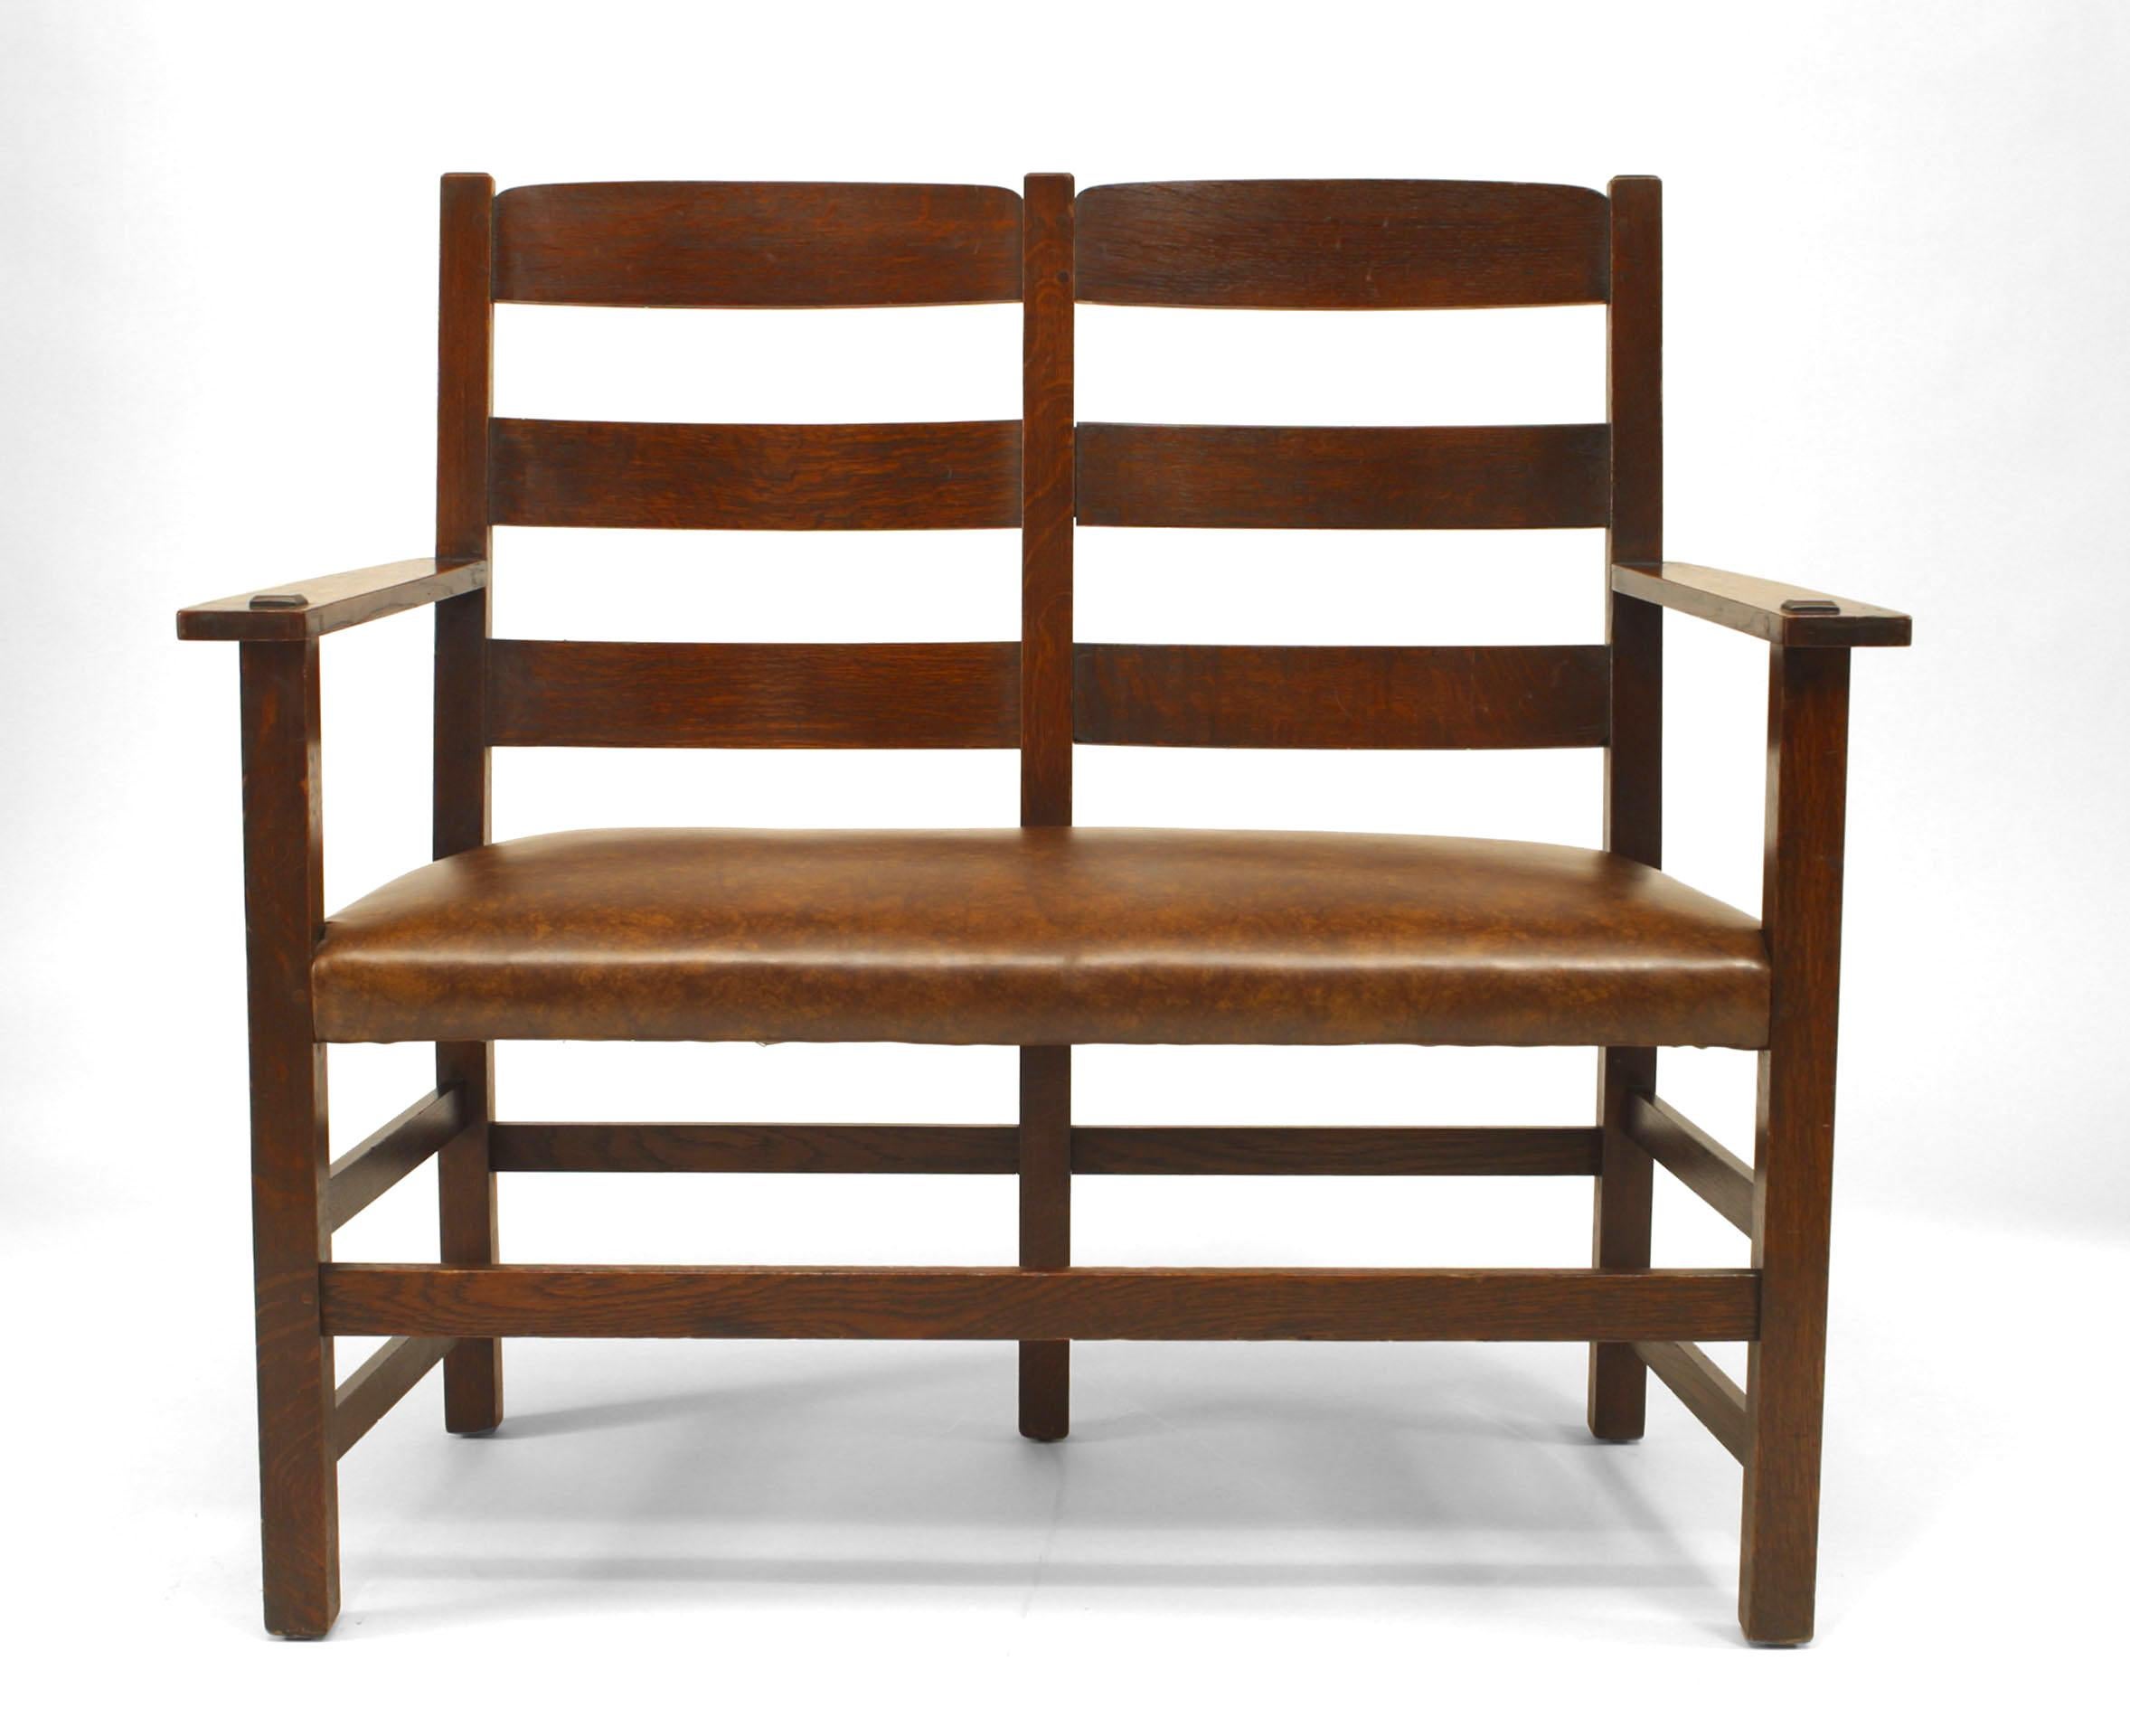 American Mission oak loveseat with triple ladder back and brown leather seat (signed LIMBERT BROS..)
